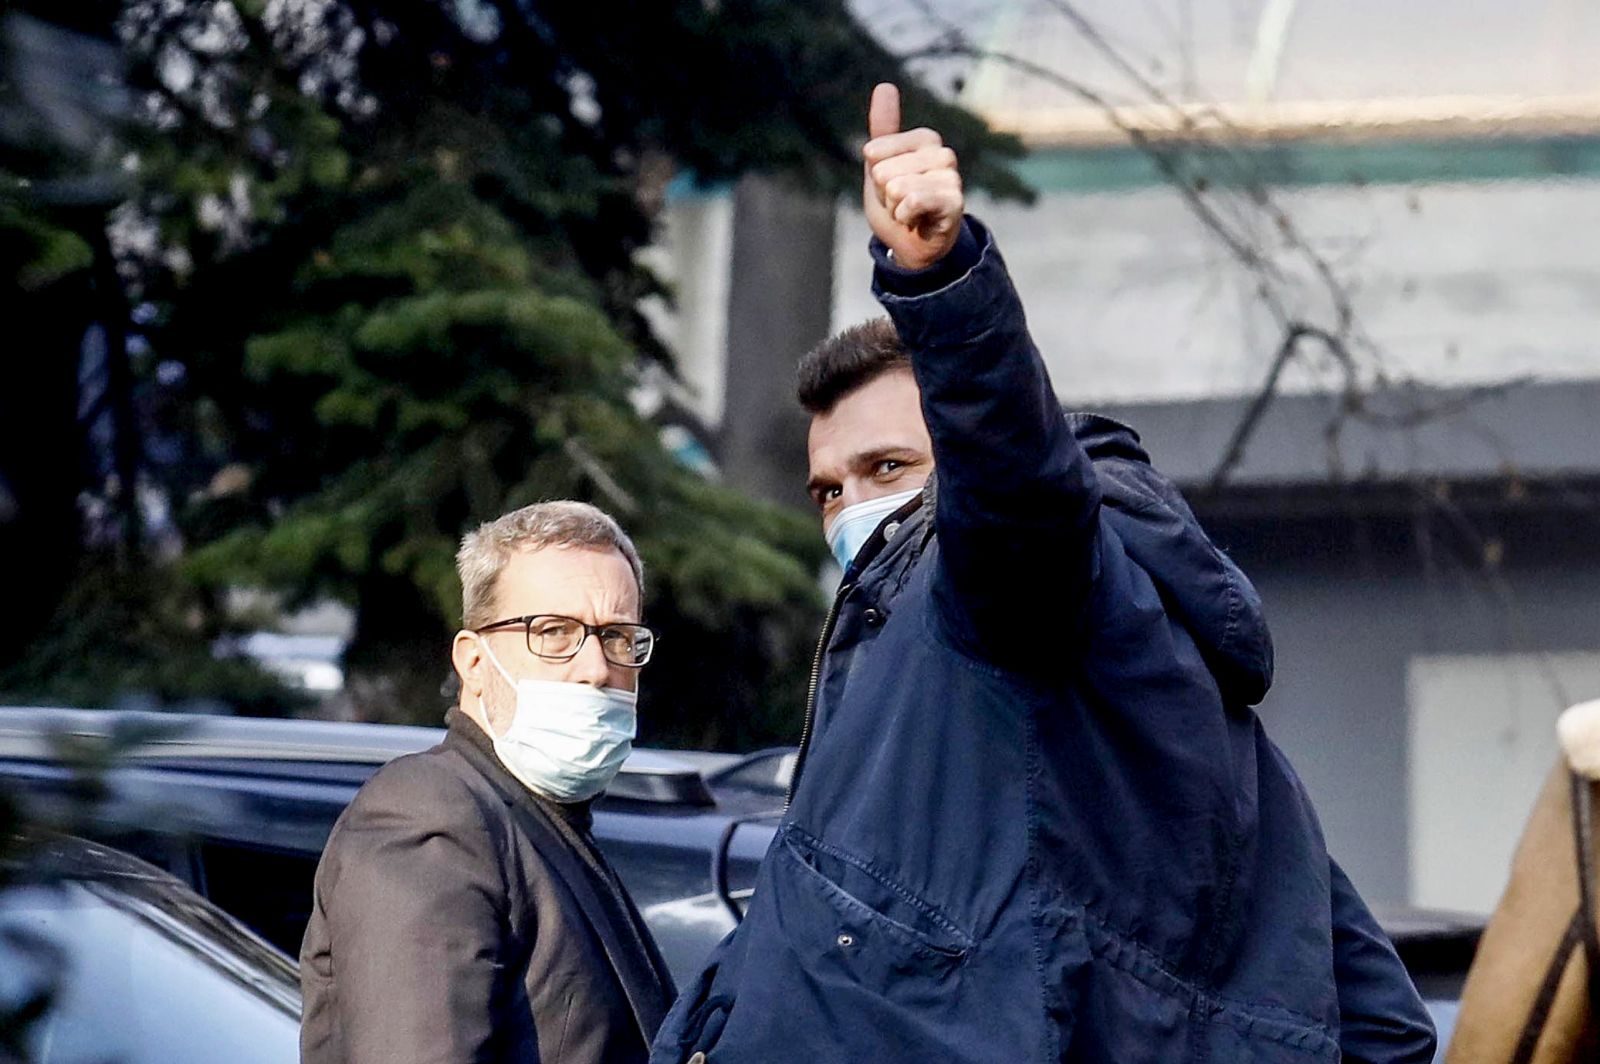 epa08945964 New AC Milan player, Croatian Mario Mandzukic (C), gestures while leaving the Madonnina clinic after undergoing a medical checkup in Milan, Italy, 18 January 2021. AC Milan signed 34-year-old Mandzukic on short-term deal until end of the season.  EPA/MOURAD BALTI TOUATI